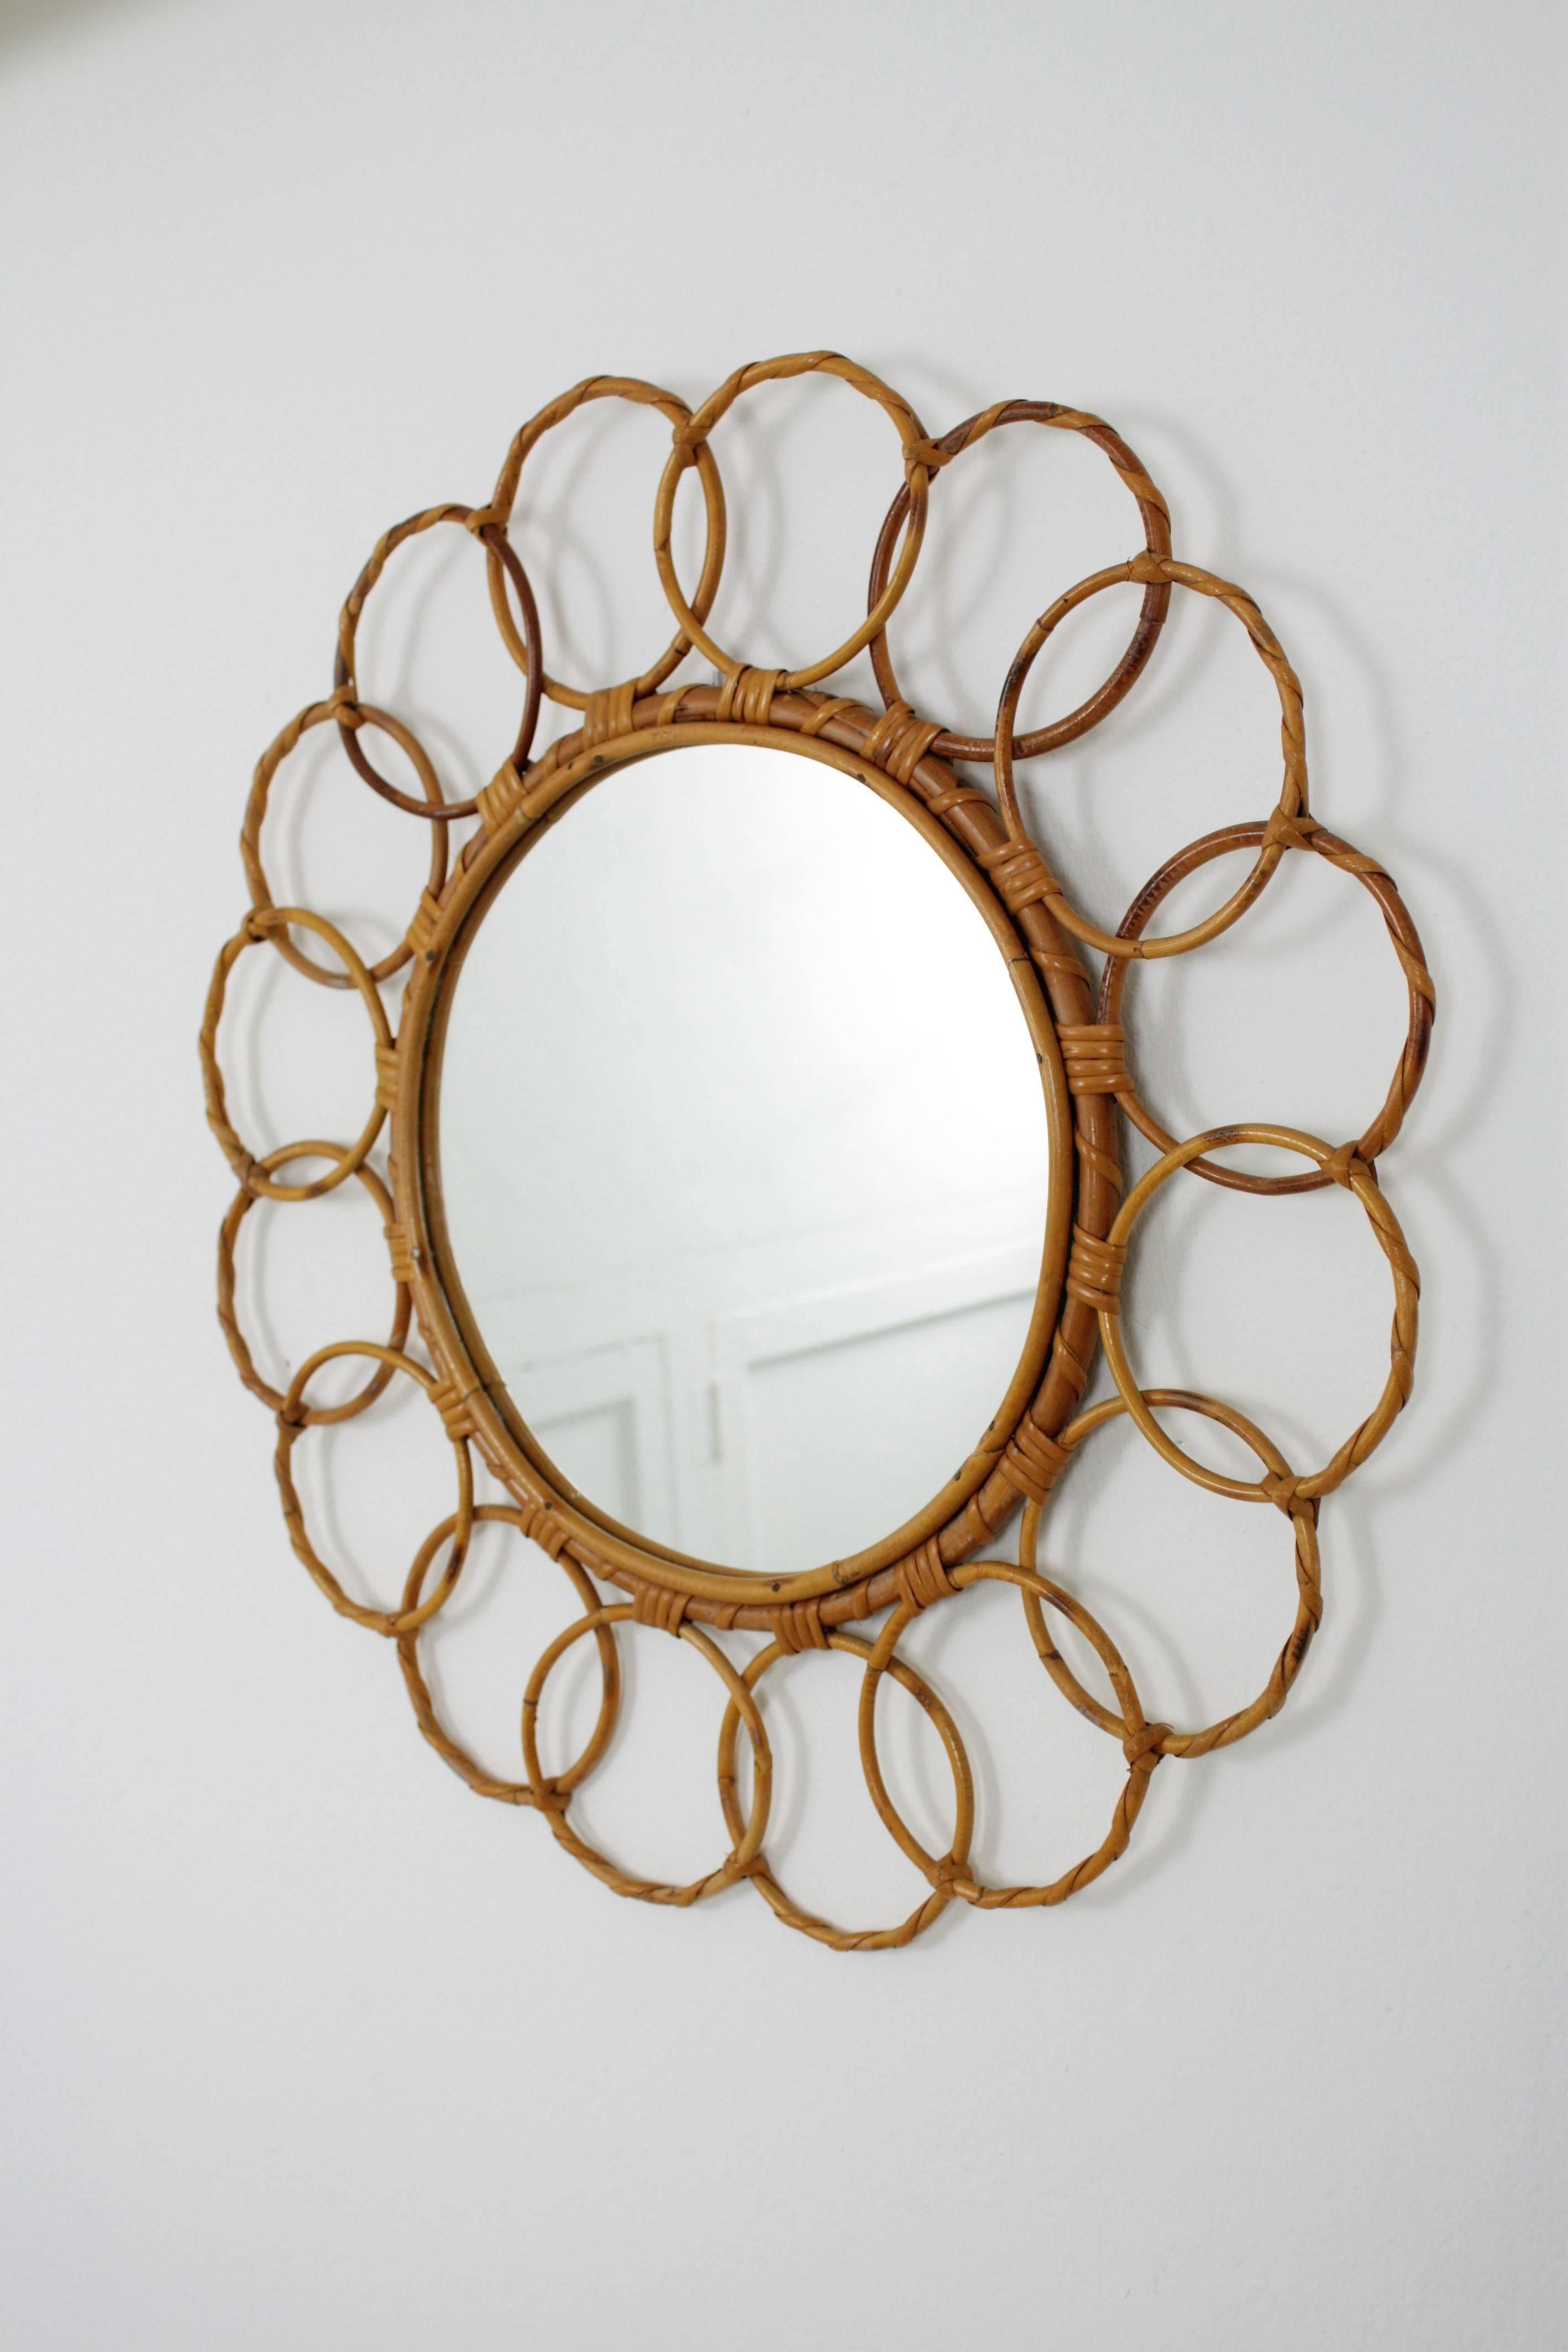 A highly decorative Spanish hand-crafted bamboo and rattan mirror framed with circles. Lovely to place it alone or to create a wall decoration with other bamboo and rattan mirrors,
excellent vintage condition,
Spain, 1960s.

Beautiful to place